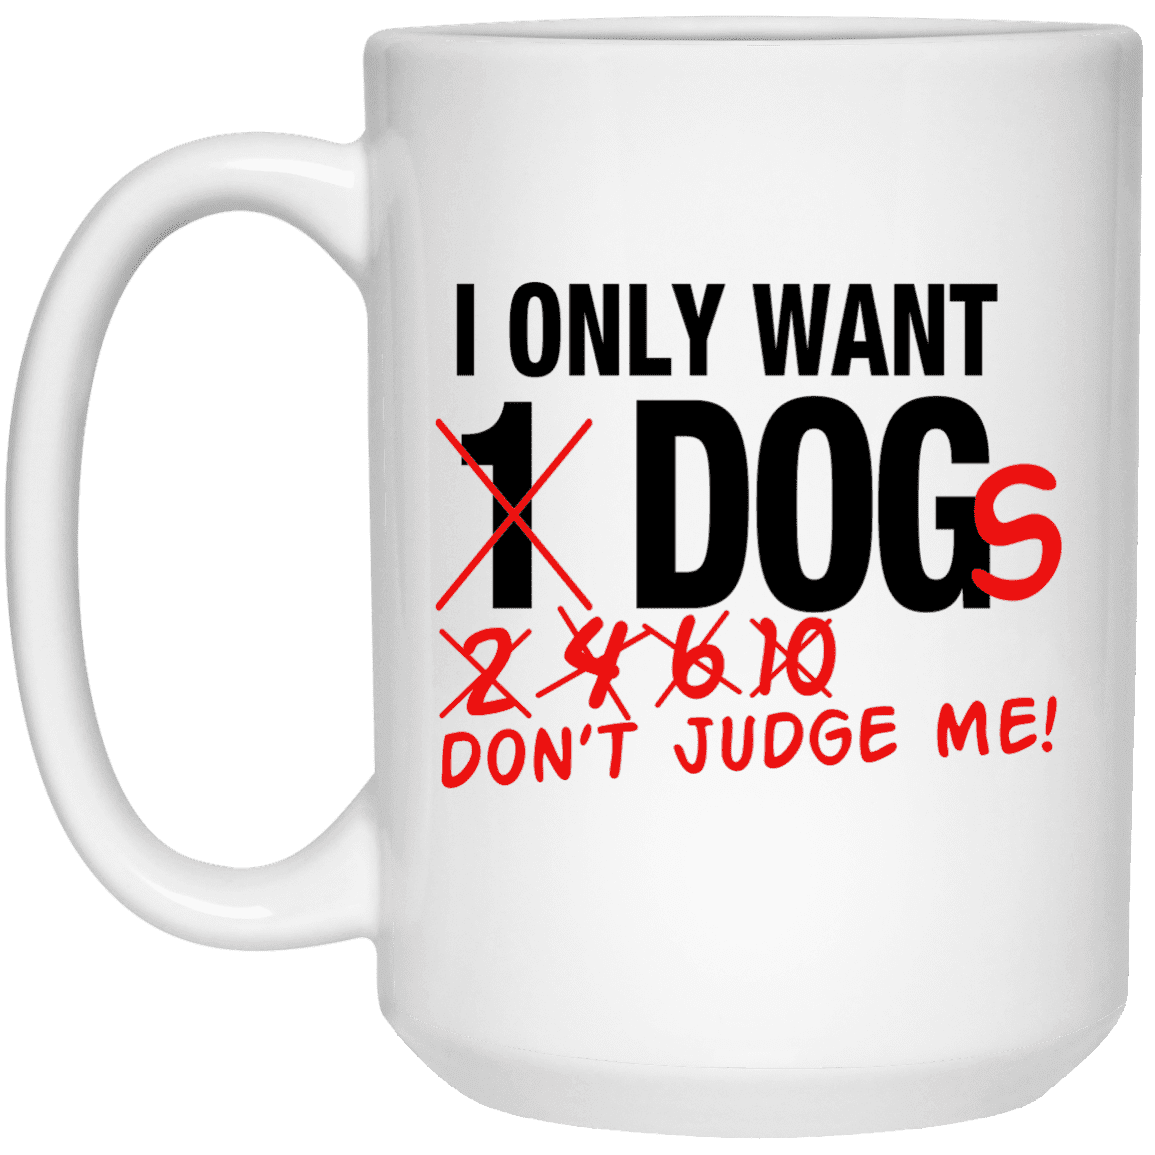 I Only Want Dogs - Mugs.